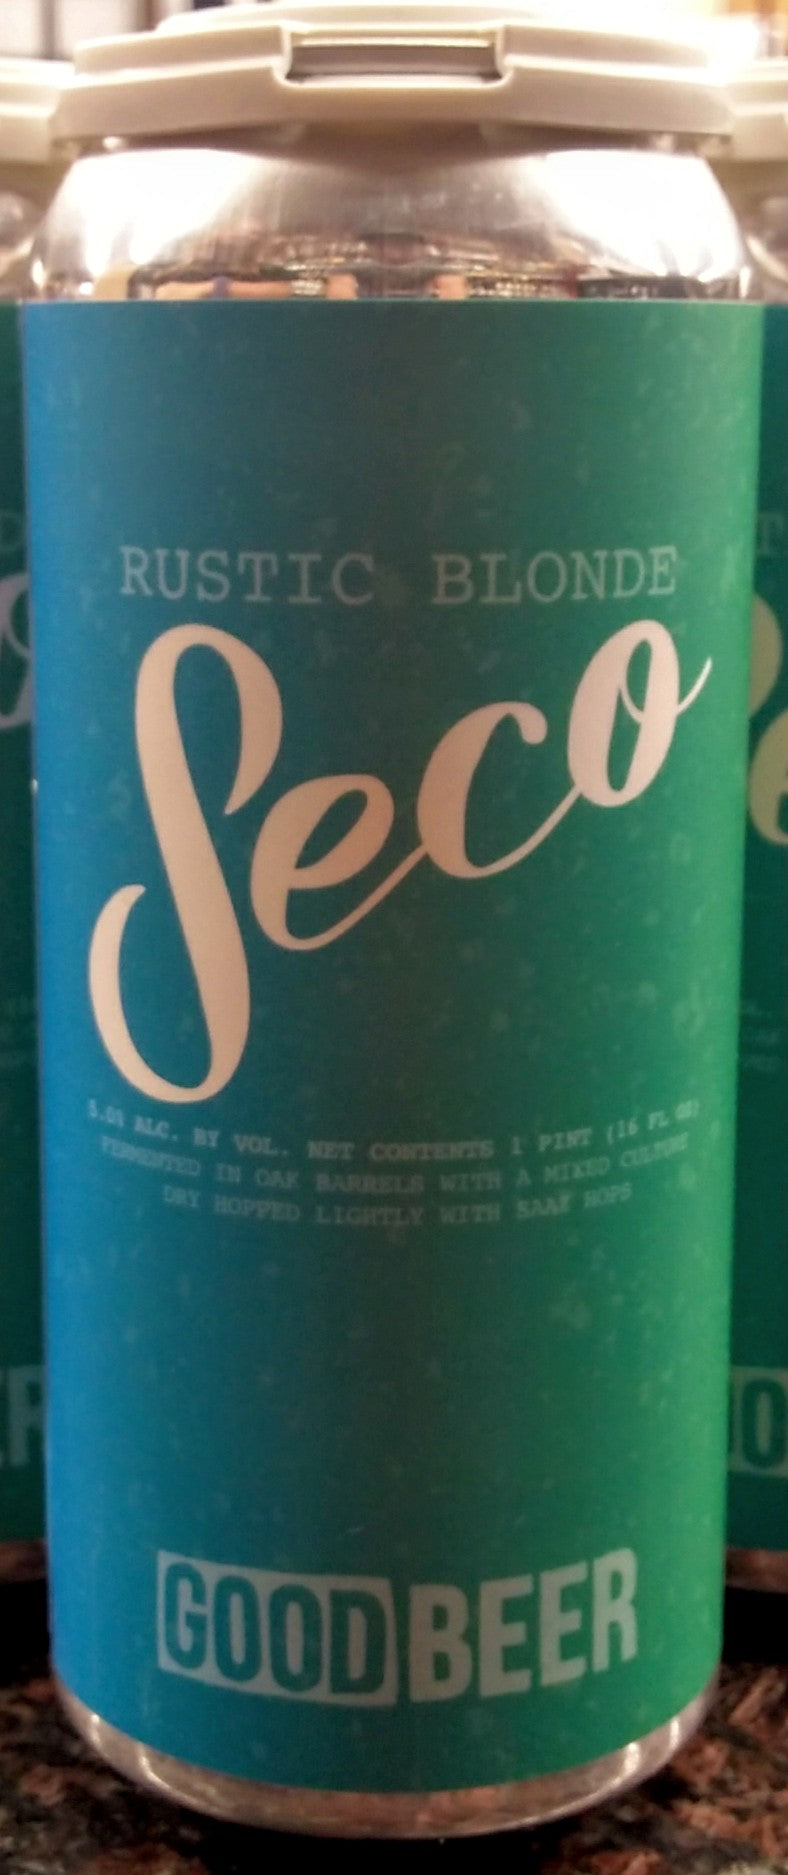 THE GOOD BEER CO. SECO RUSTIC BLONDE ALE 16oz can